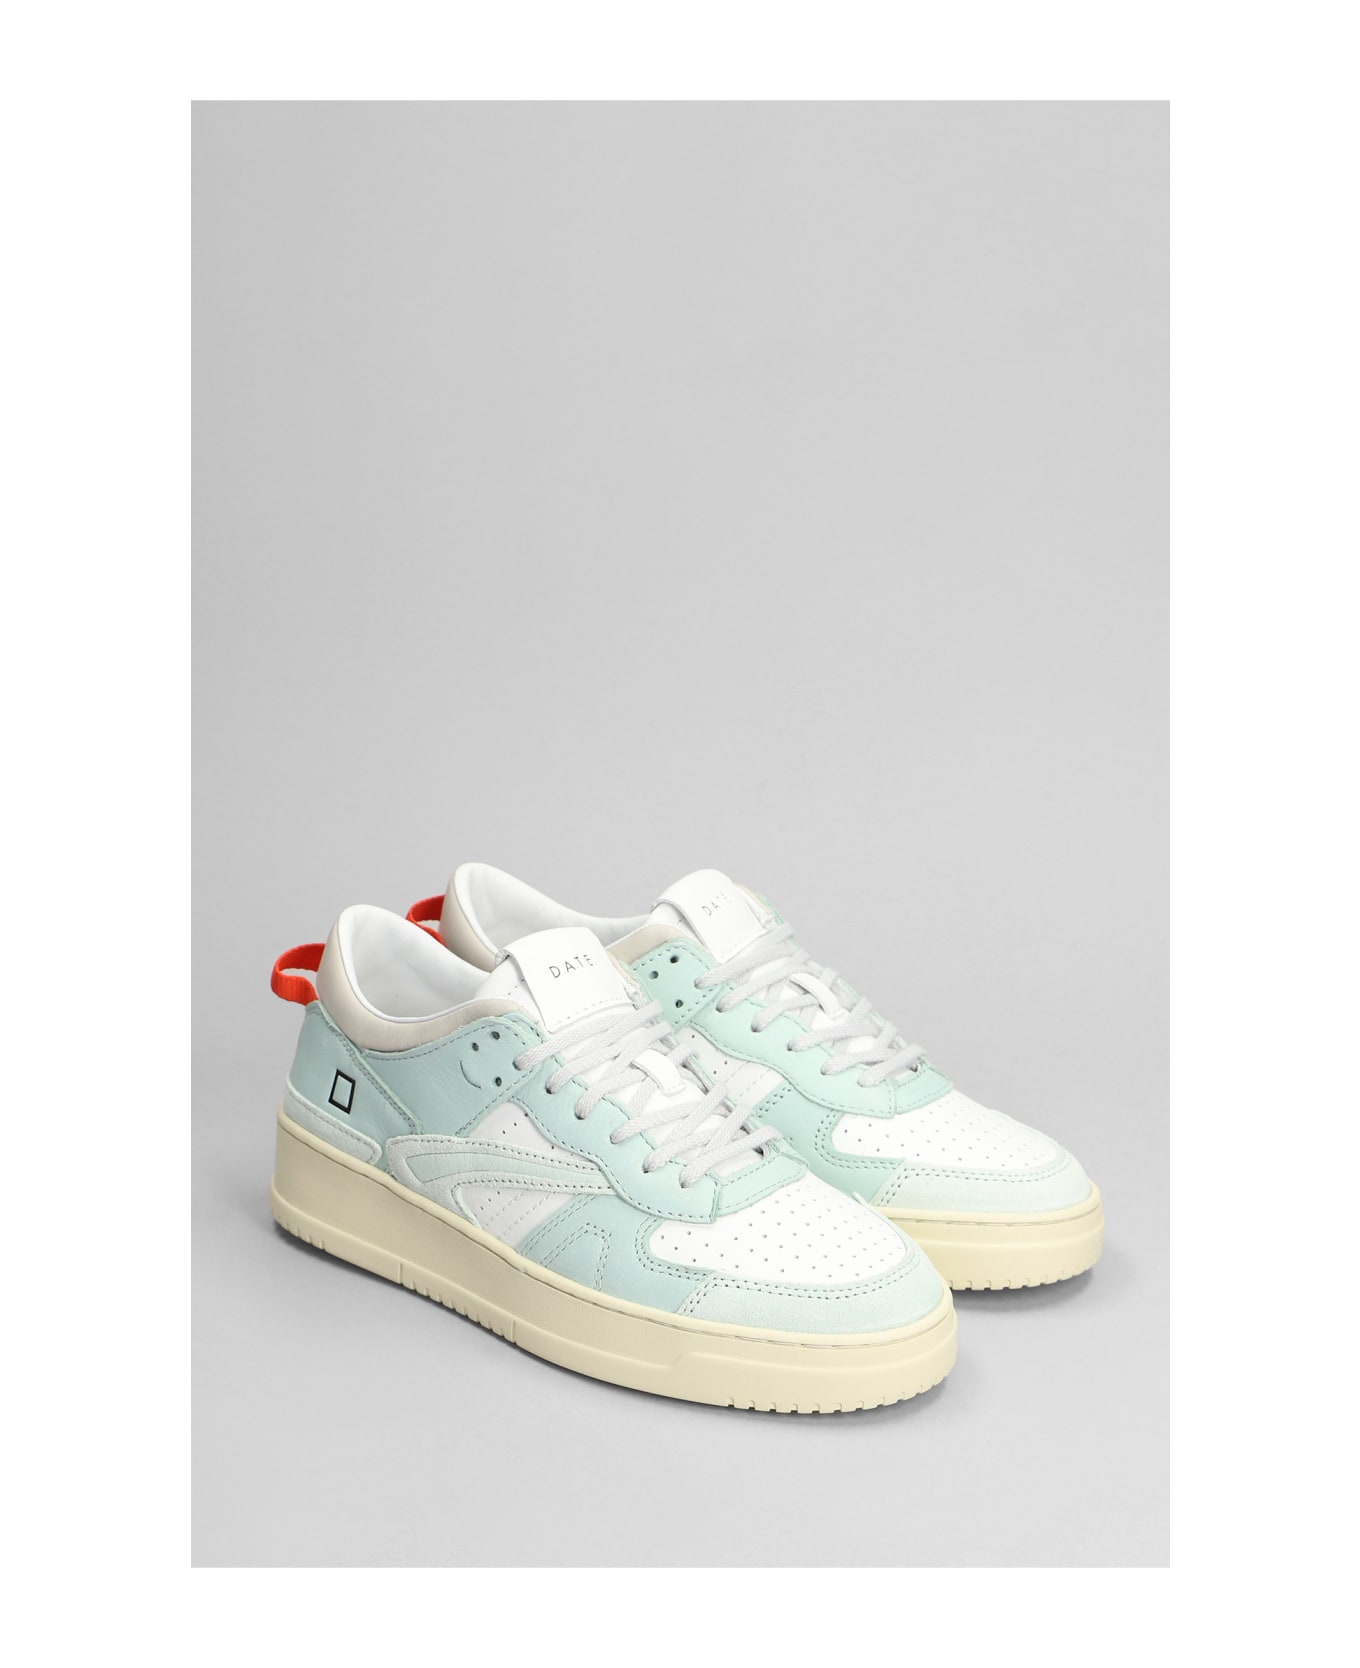 D.A.T.E. Torneo Sneakers In White Leather - white